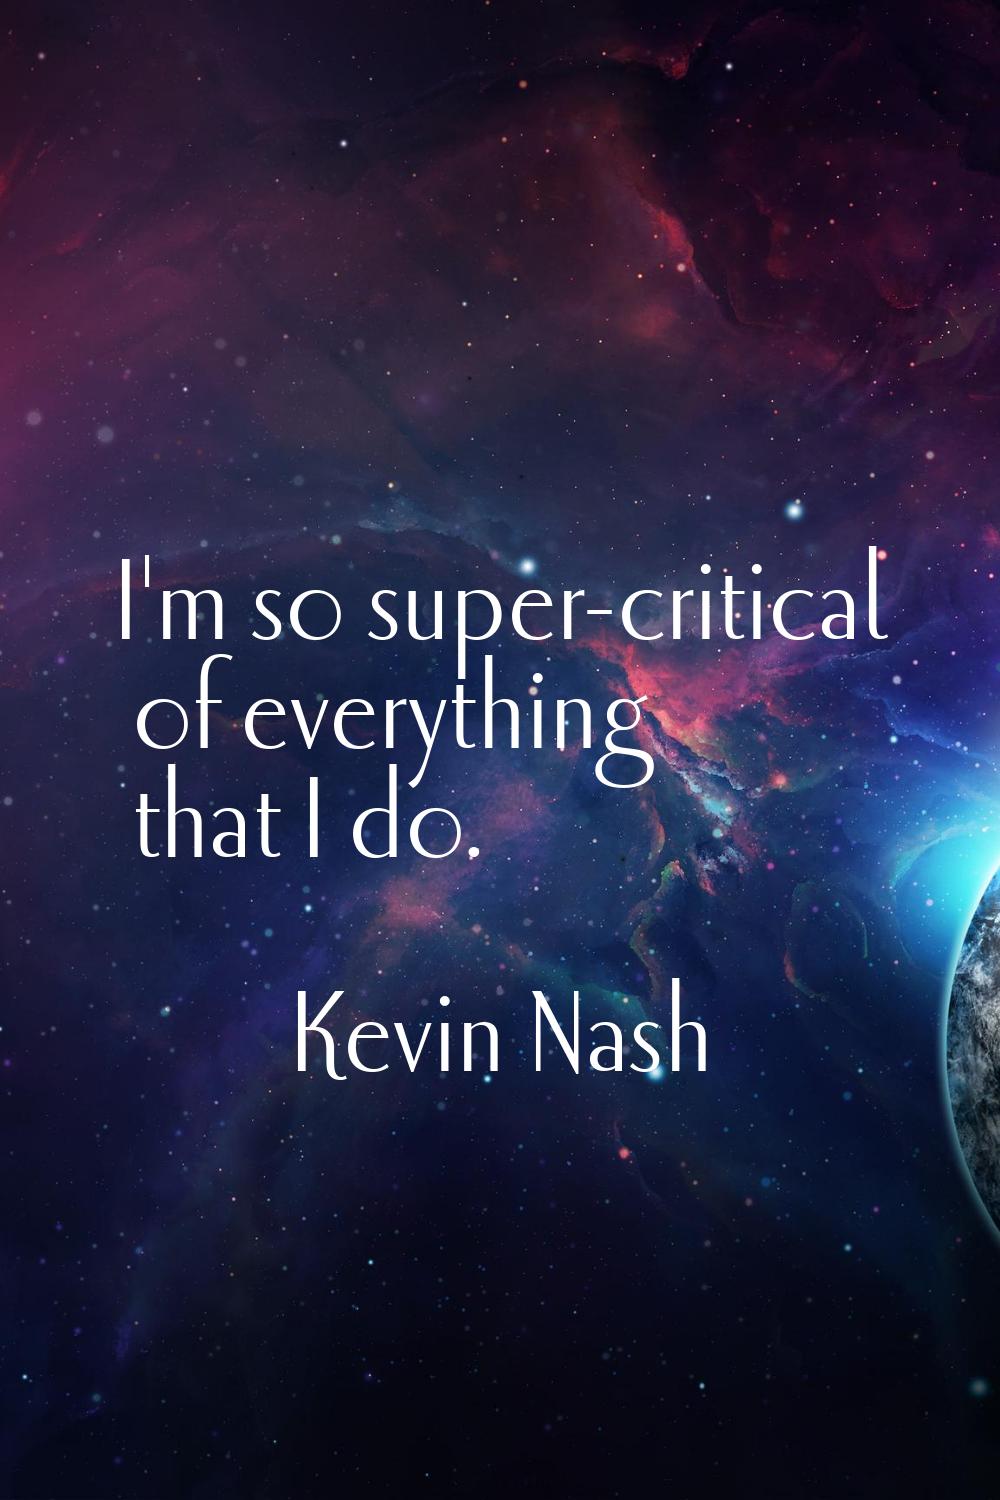 I'm so super-critical of everything that I do.